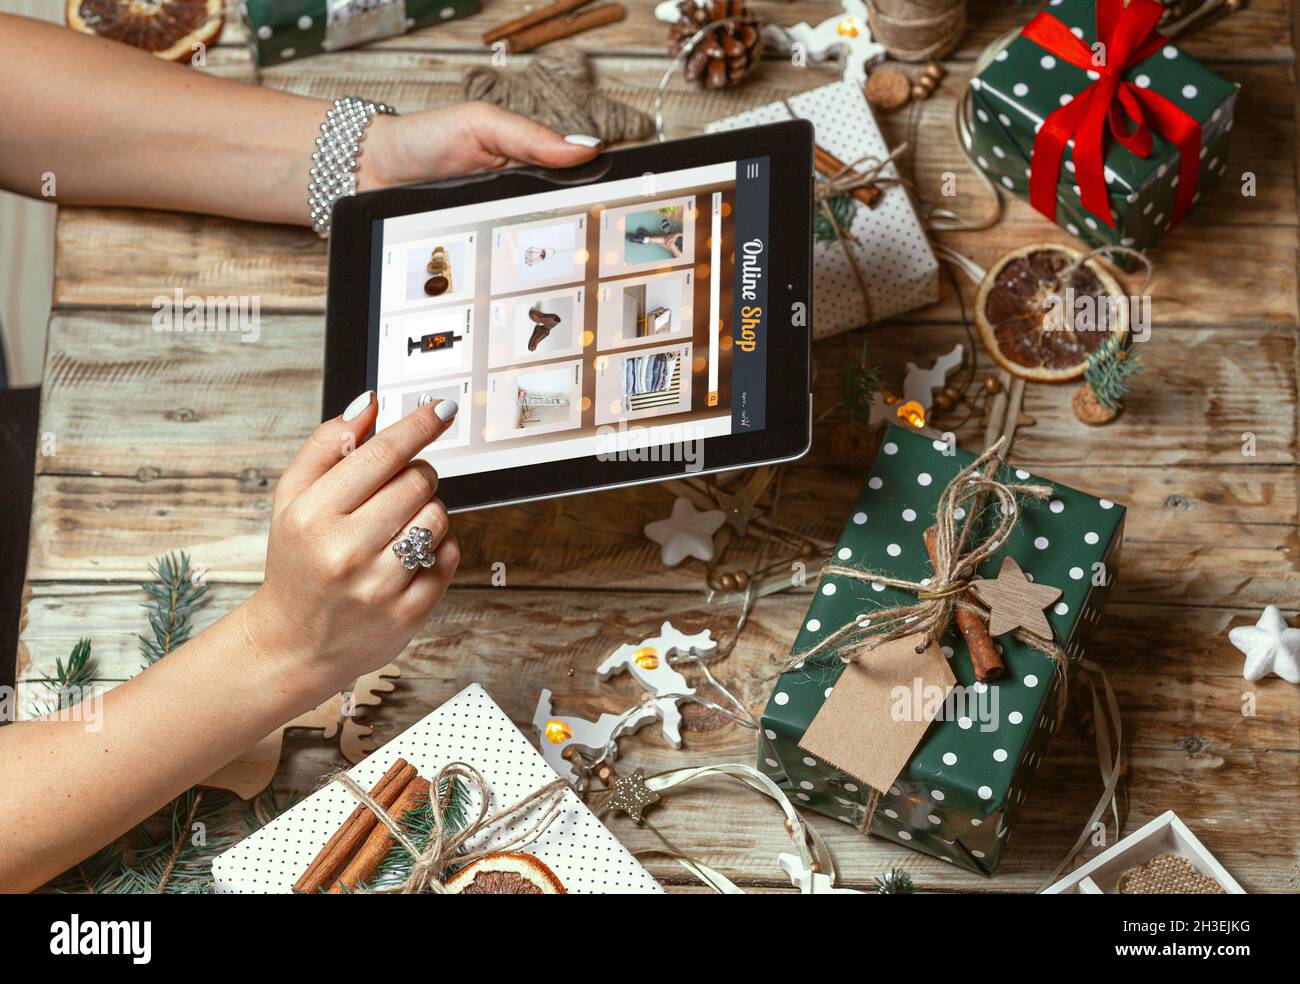 Female hands with tablet on table with hand made christmas decor Stock Photo